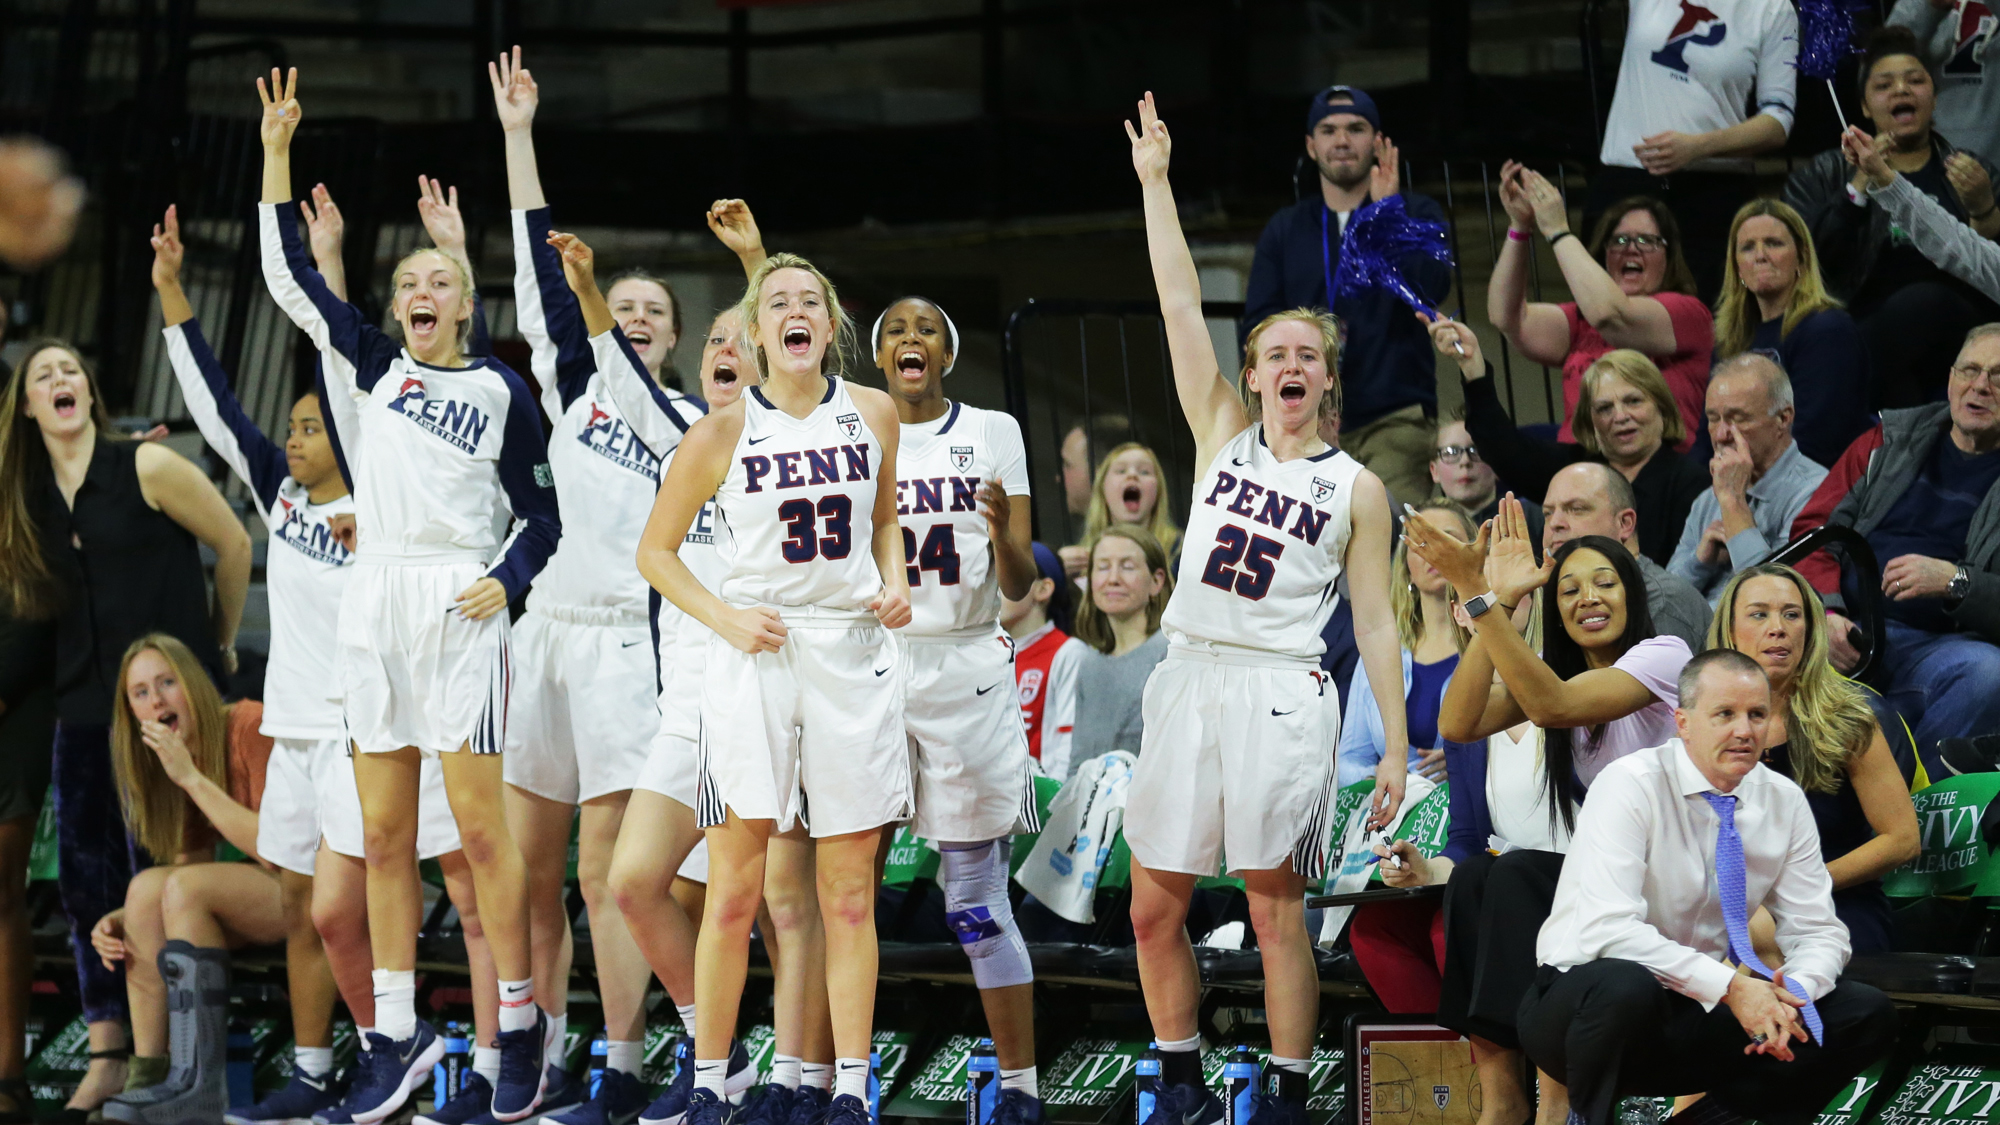 Players on the women's basketball team cheer on their teammates from the bench at The Palestra